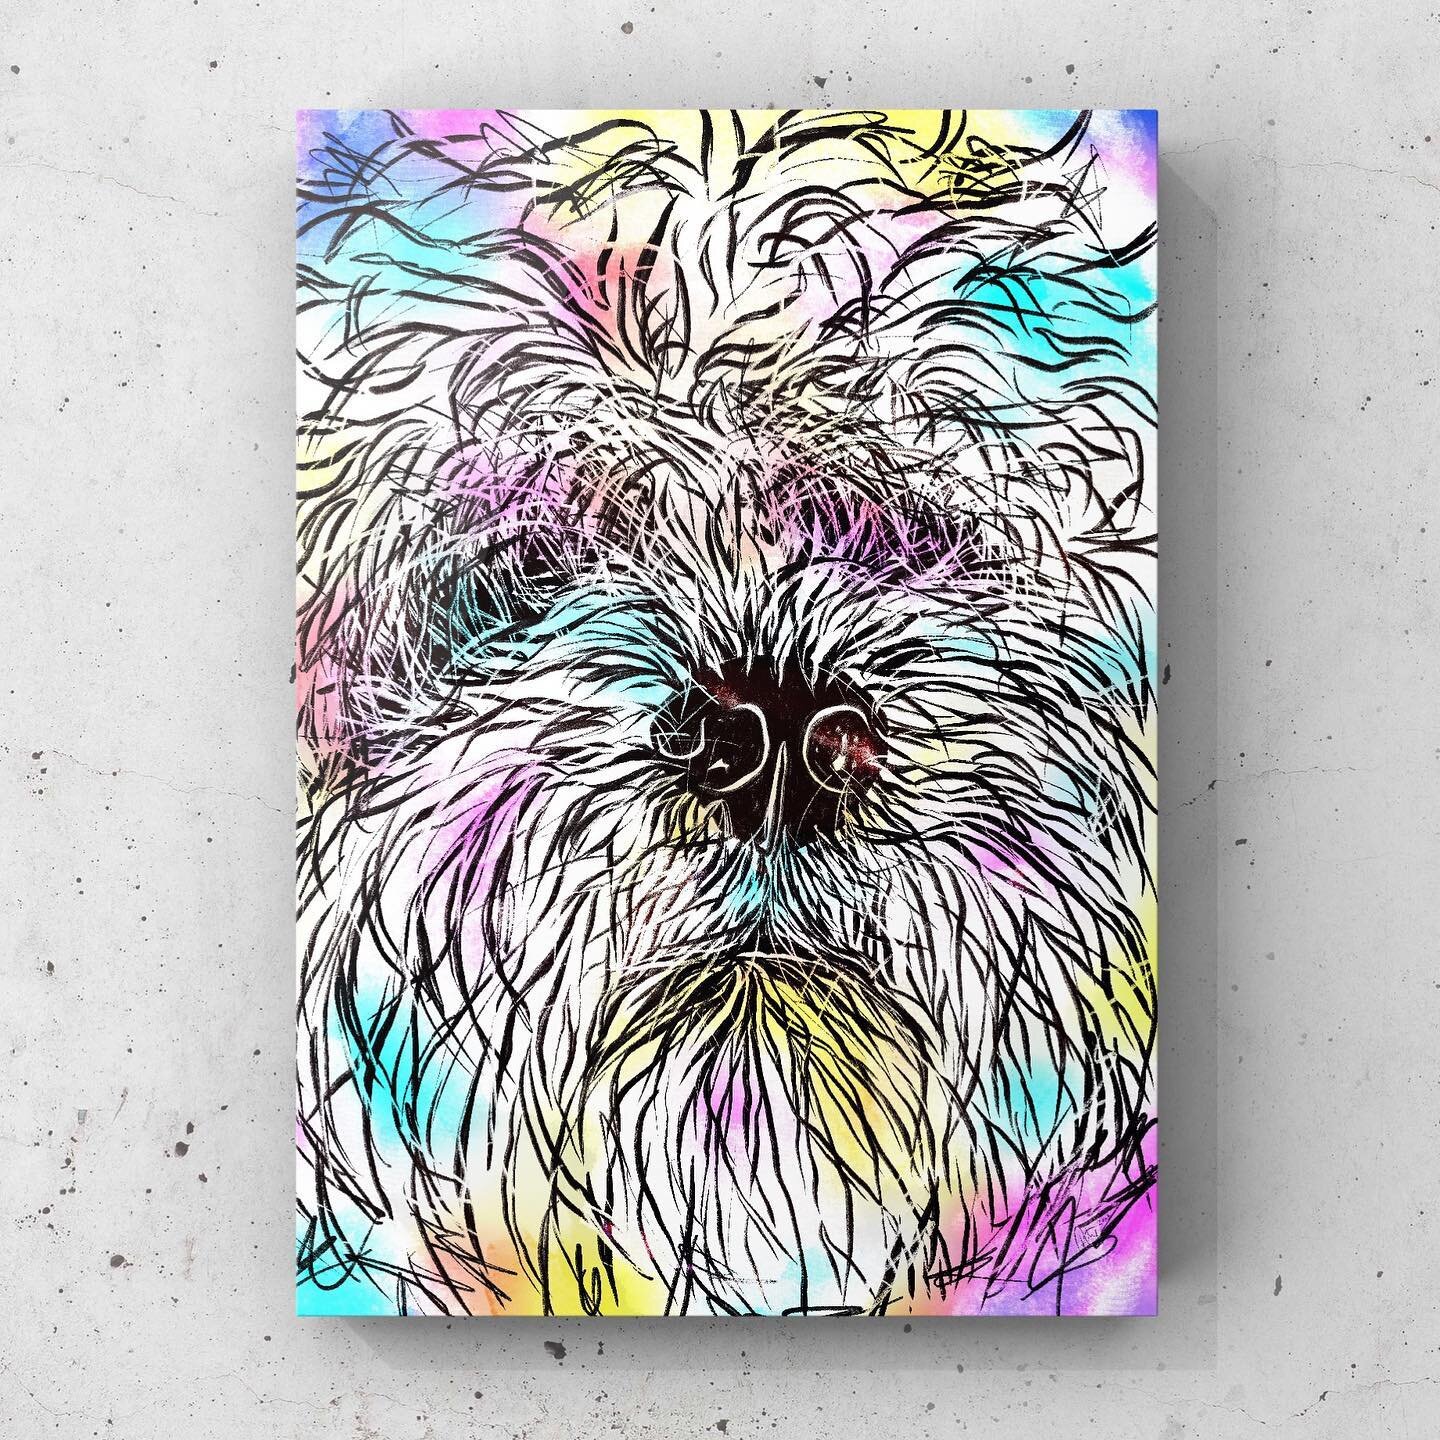 It&rsquo;s been a while&hellip;a messy digital sketch inspired by a pic sent to me from a friend &hellip; this is &lsquo;Buddy&rsquo; &hellip;

#dogart #puppyart #digitalart #animalart #messysketch #rcarty #rcartydesigns